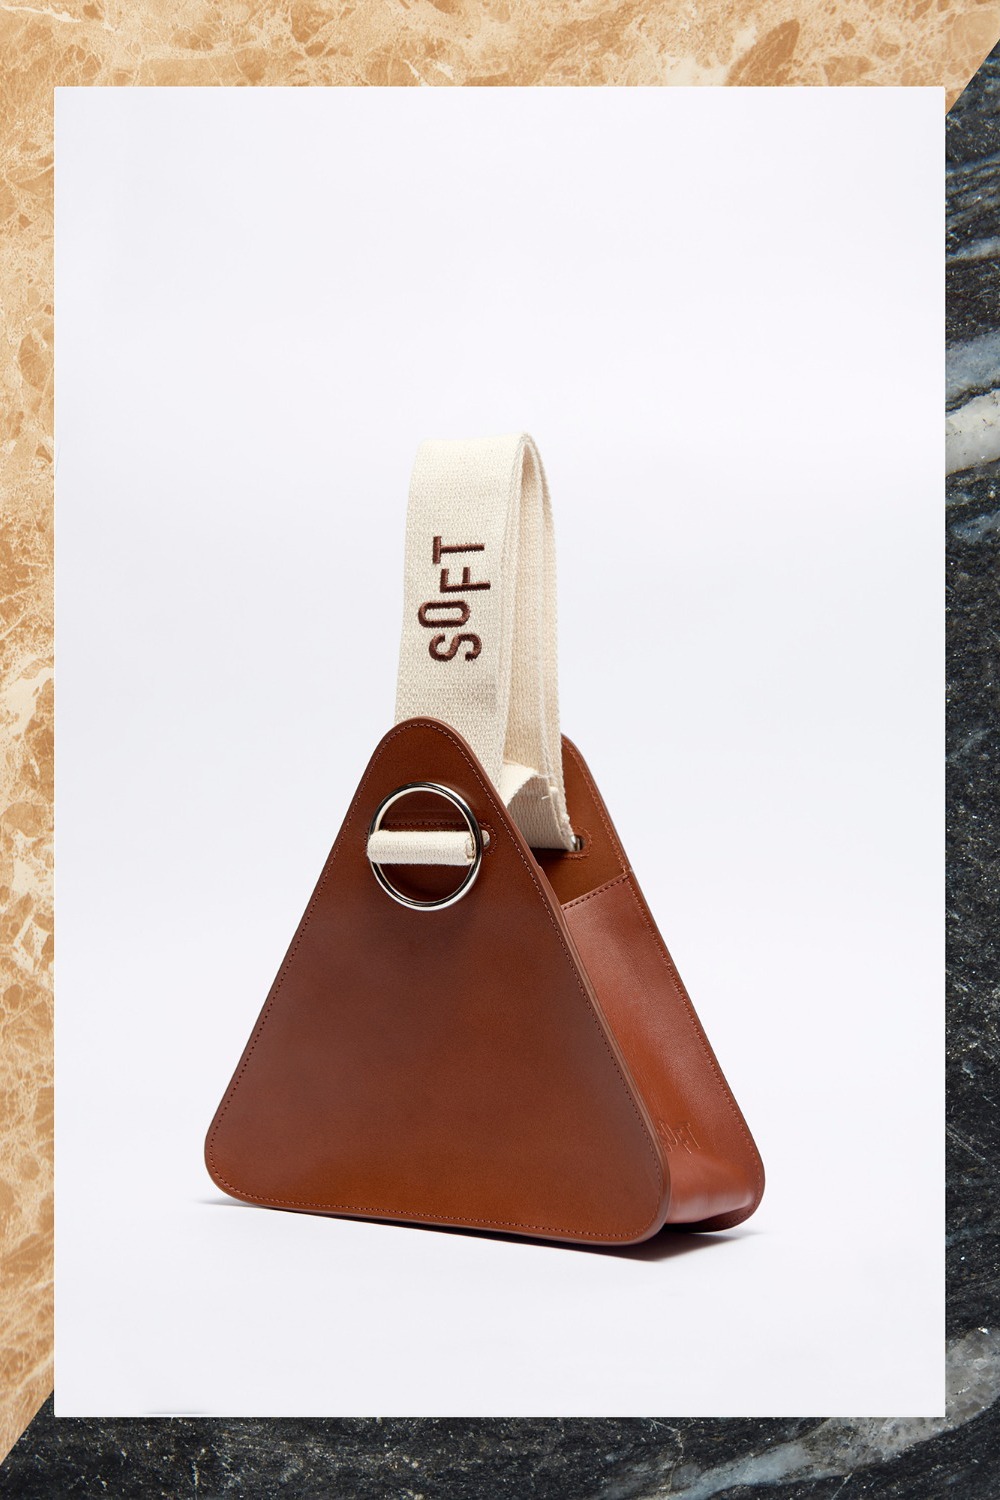 9th_SOFT TRIANGLE BAG - BROWN